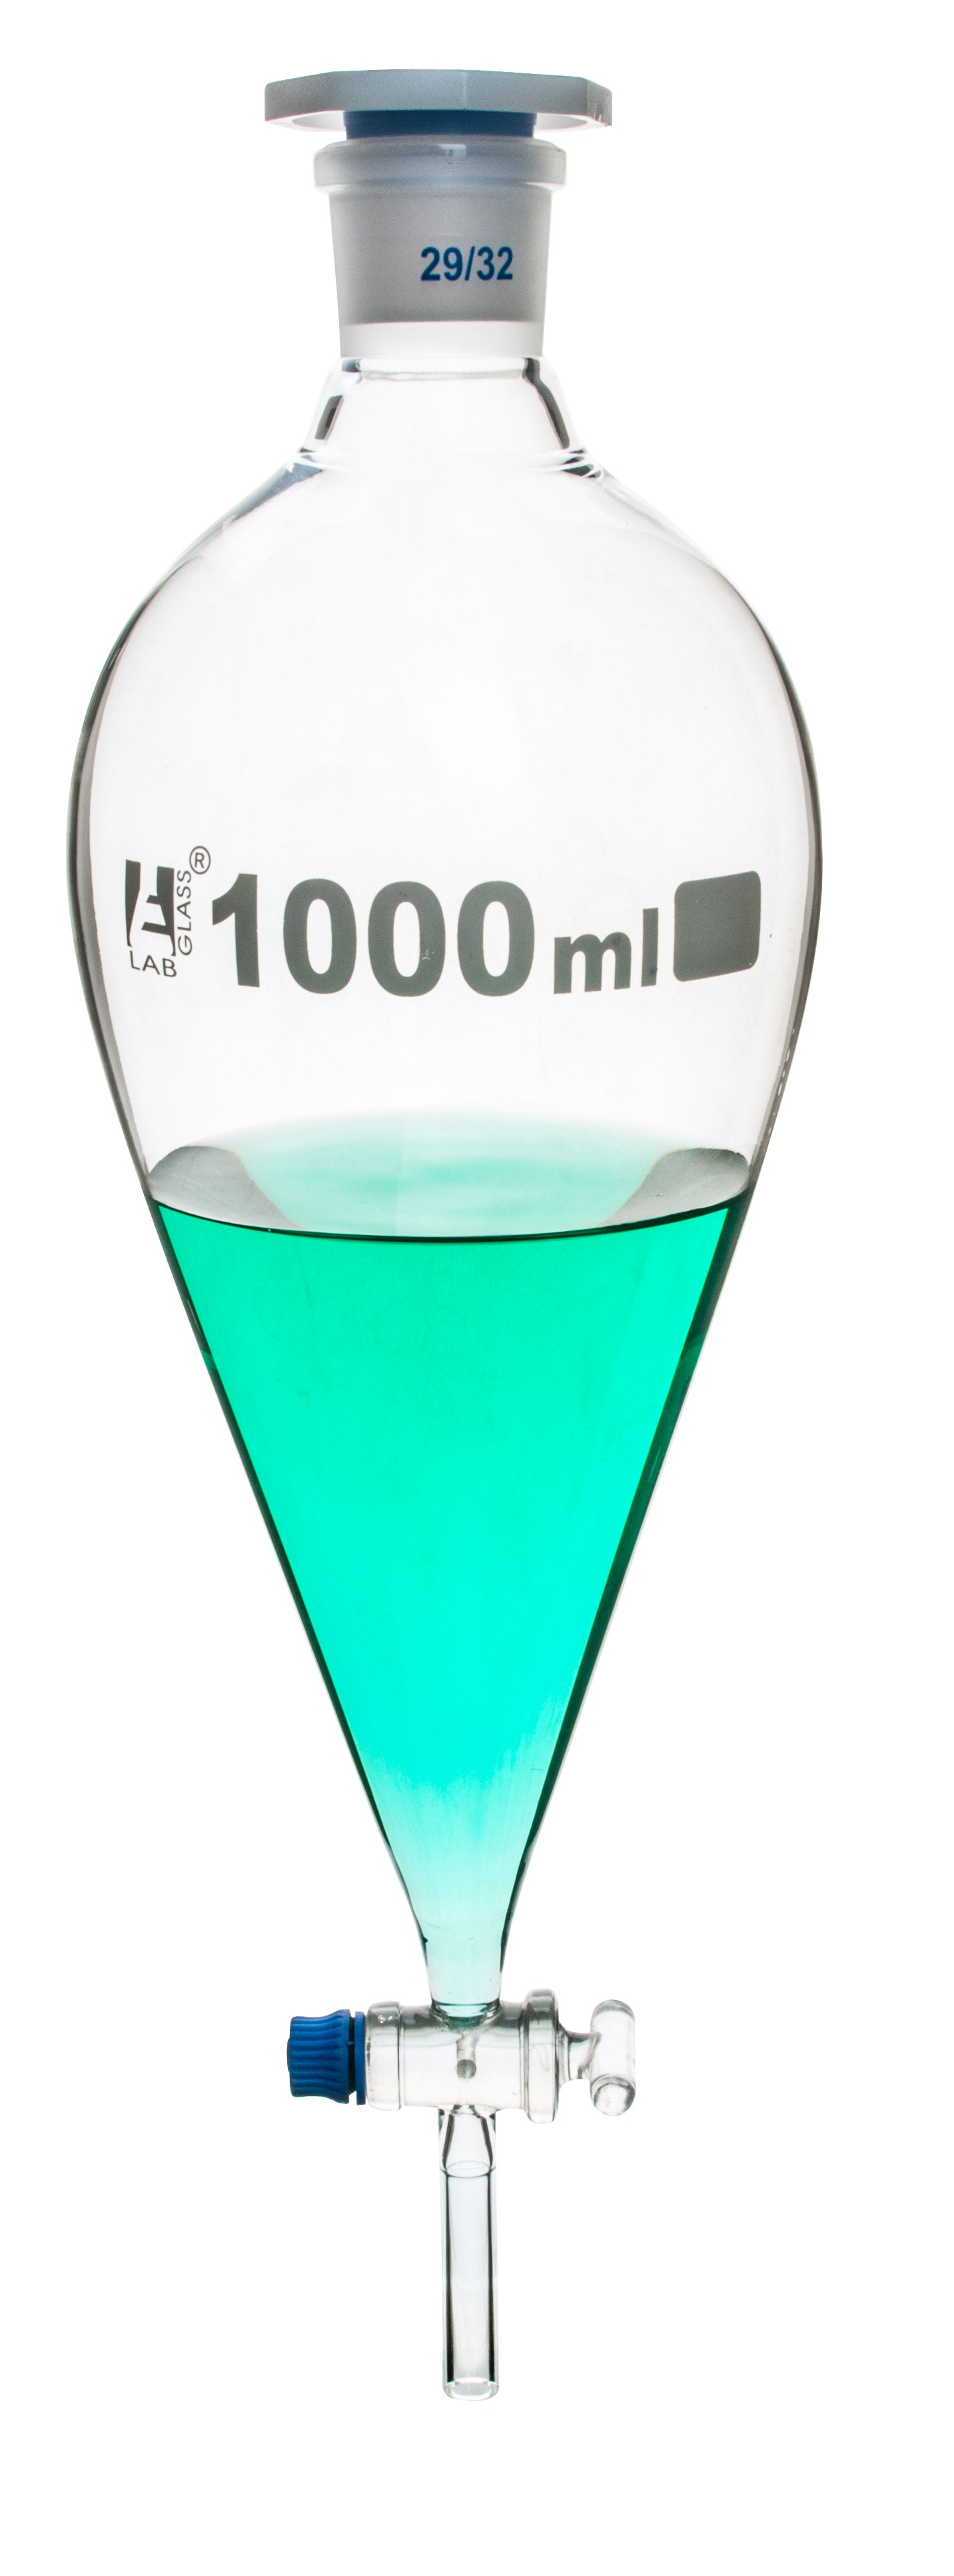 Glass Squibb Separatory Funnel with Glass Key Stopcock and Interchangeable Polypropylene Stopper, 1,000 ml, Autoclavable